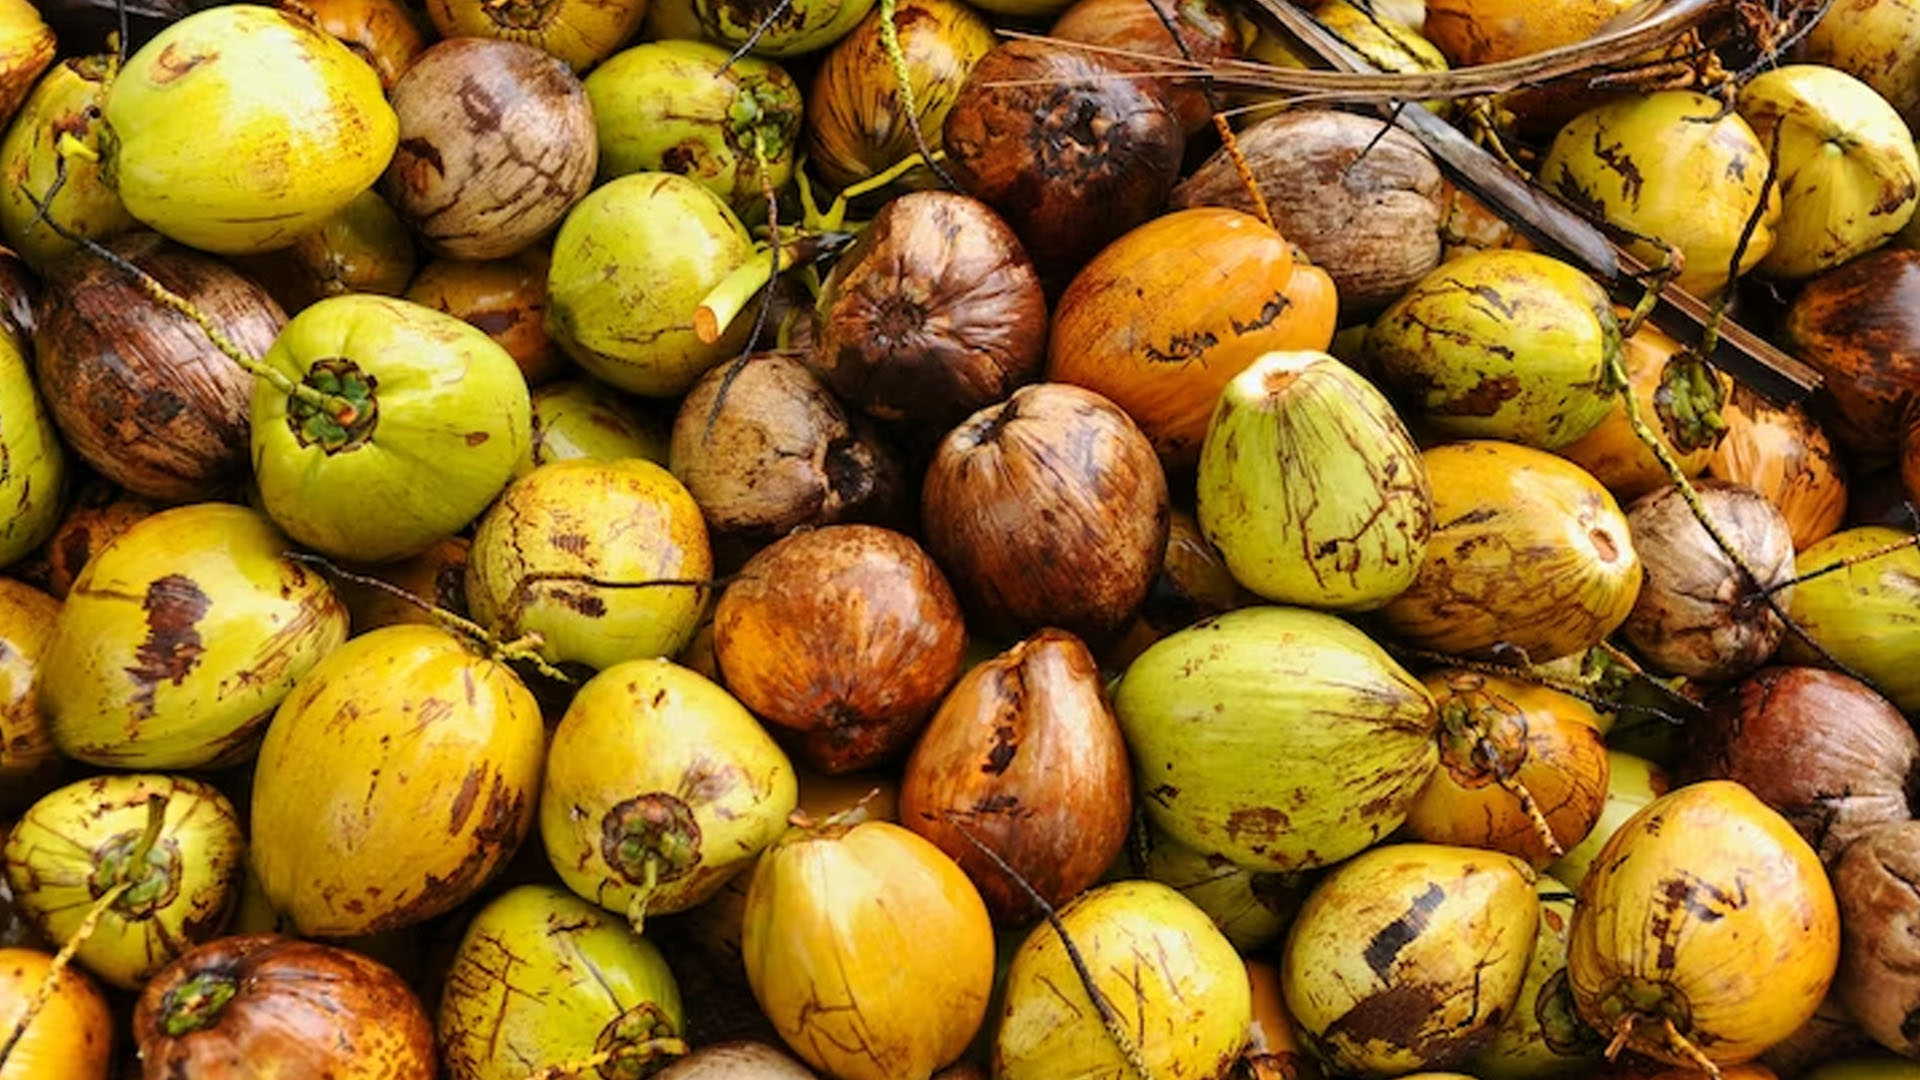 Does Palm Fruit Have Health Benefits?